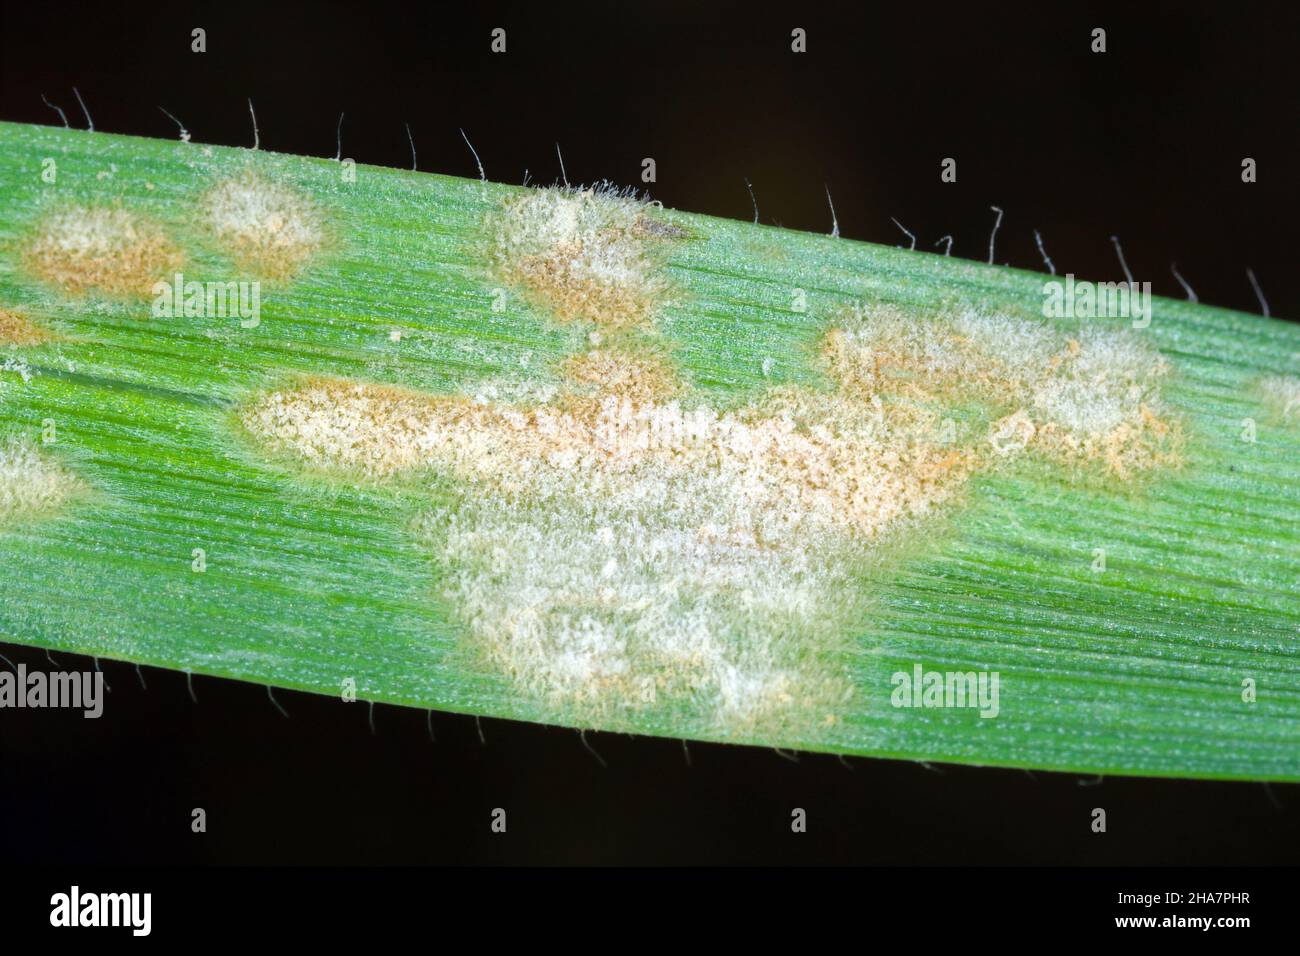 Barley powdery mildew or corn mildew caused by the fungus Blumeria graminis is a significant disease affecting cereal crops. Stock Photo